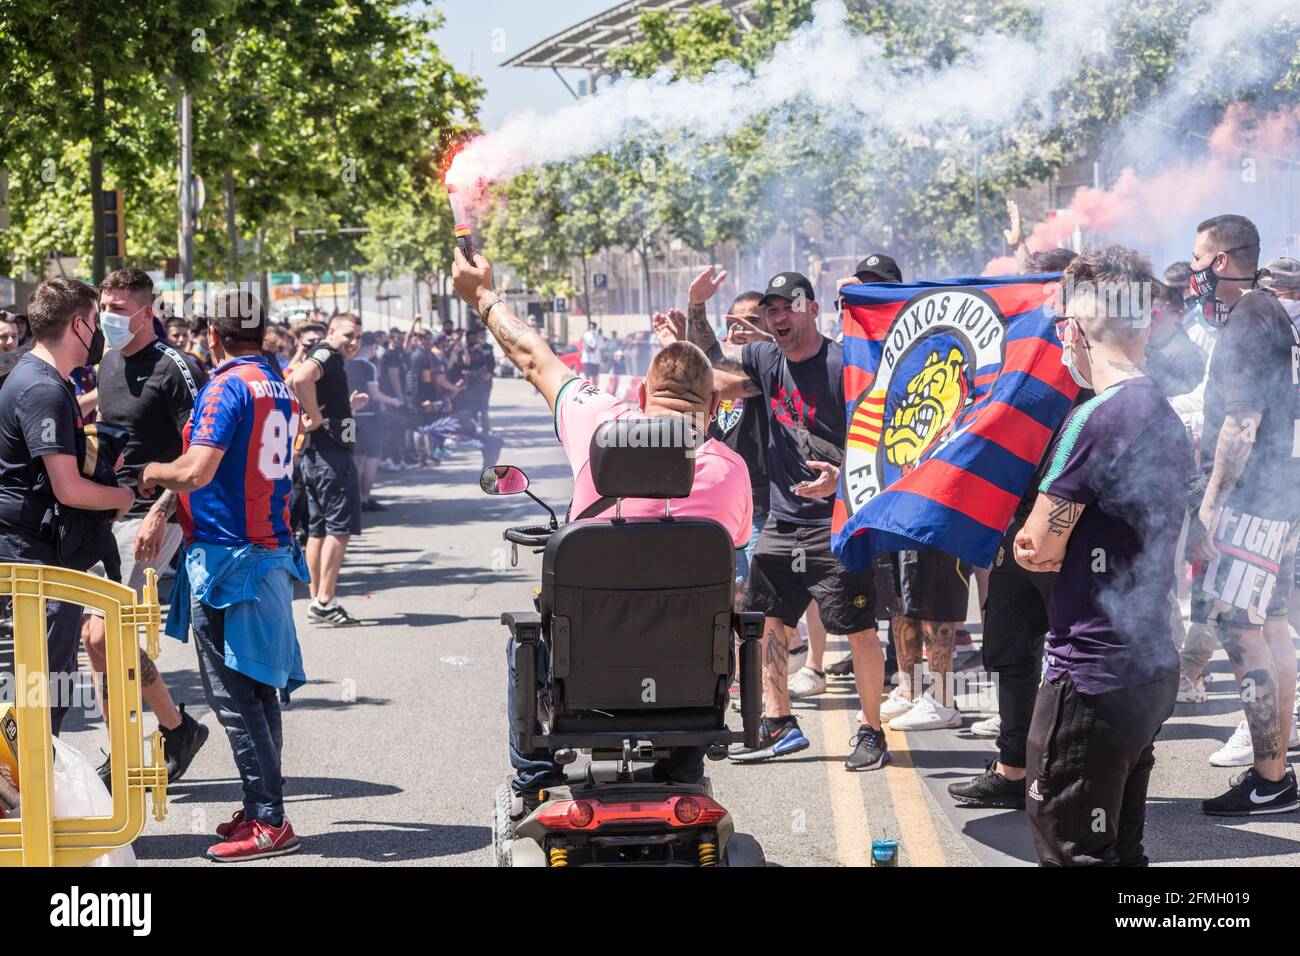 Barcelona, Catalonia, Spain. 8th May, 2021. FC Barcelona fan is seen in an electric wheelchair with a flare.The ultras supporter group of Futbol Club Barcelona, Boixos Nois (Crazy Boys) have gathered outside the Camp Nou stadium to motivate the team before the match against Club Atletico de Madrid for the 35th round of La Liga, the Spanish football league. Barça's victory will put the team, currently in third place, ahead of Atletico de Madrid, which occupies the first position. Credit: Thiago Prudencio/DAX/ZUMA Wire/Alamy Live News Stock Photo